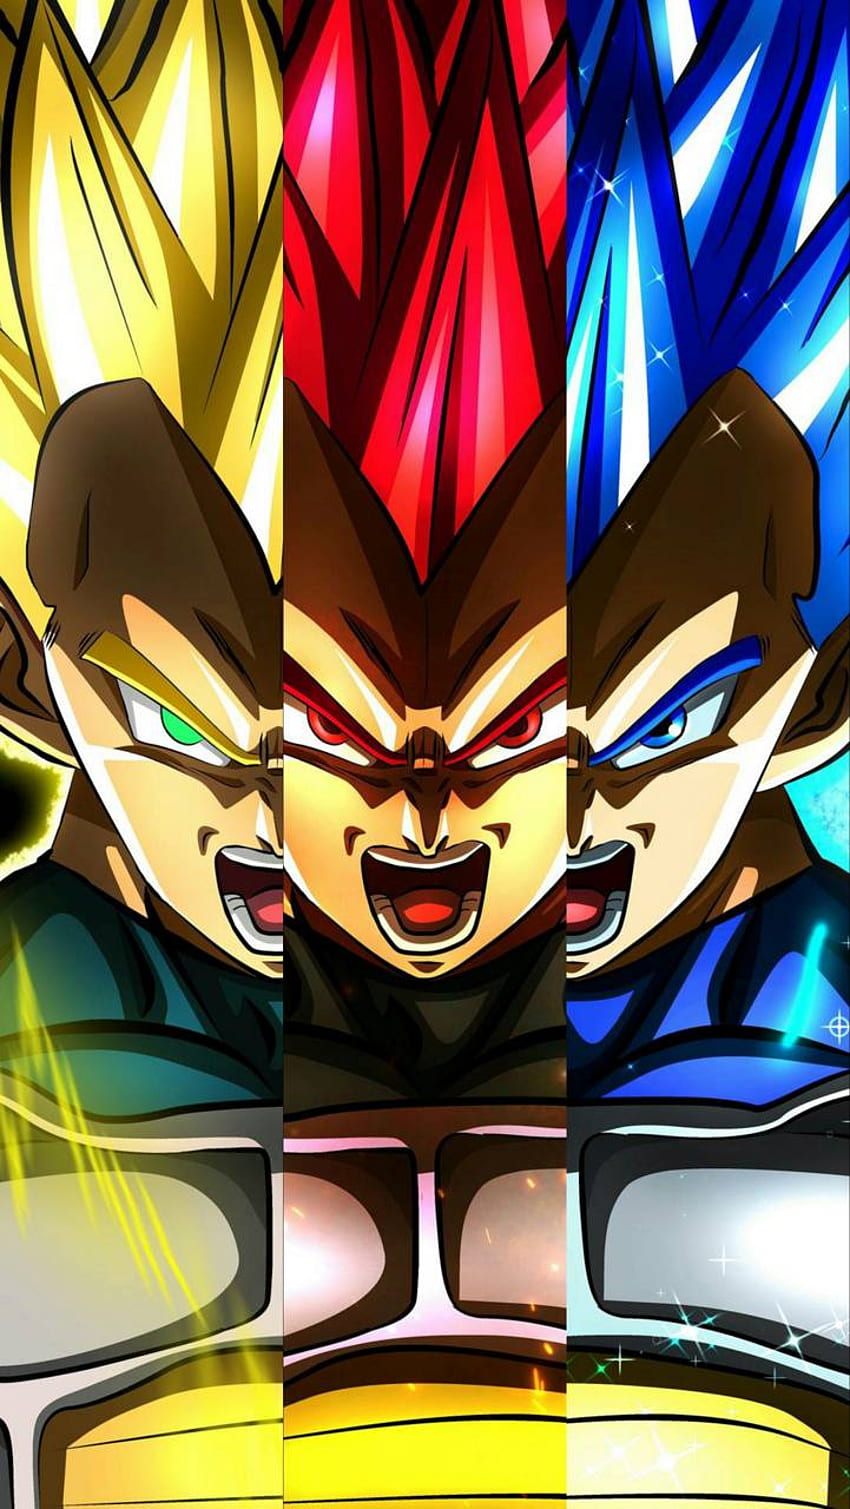 Top 10] Best Vegeta Wallpapers of All Time | GAMERS DECIDE